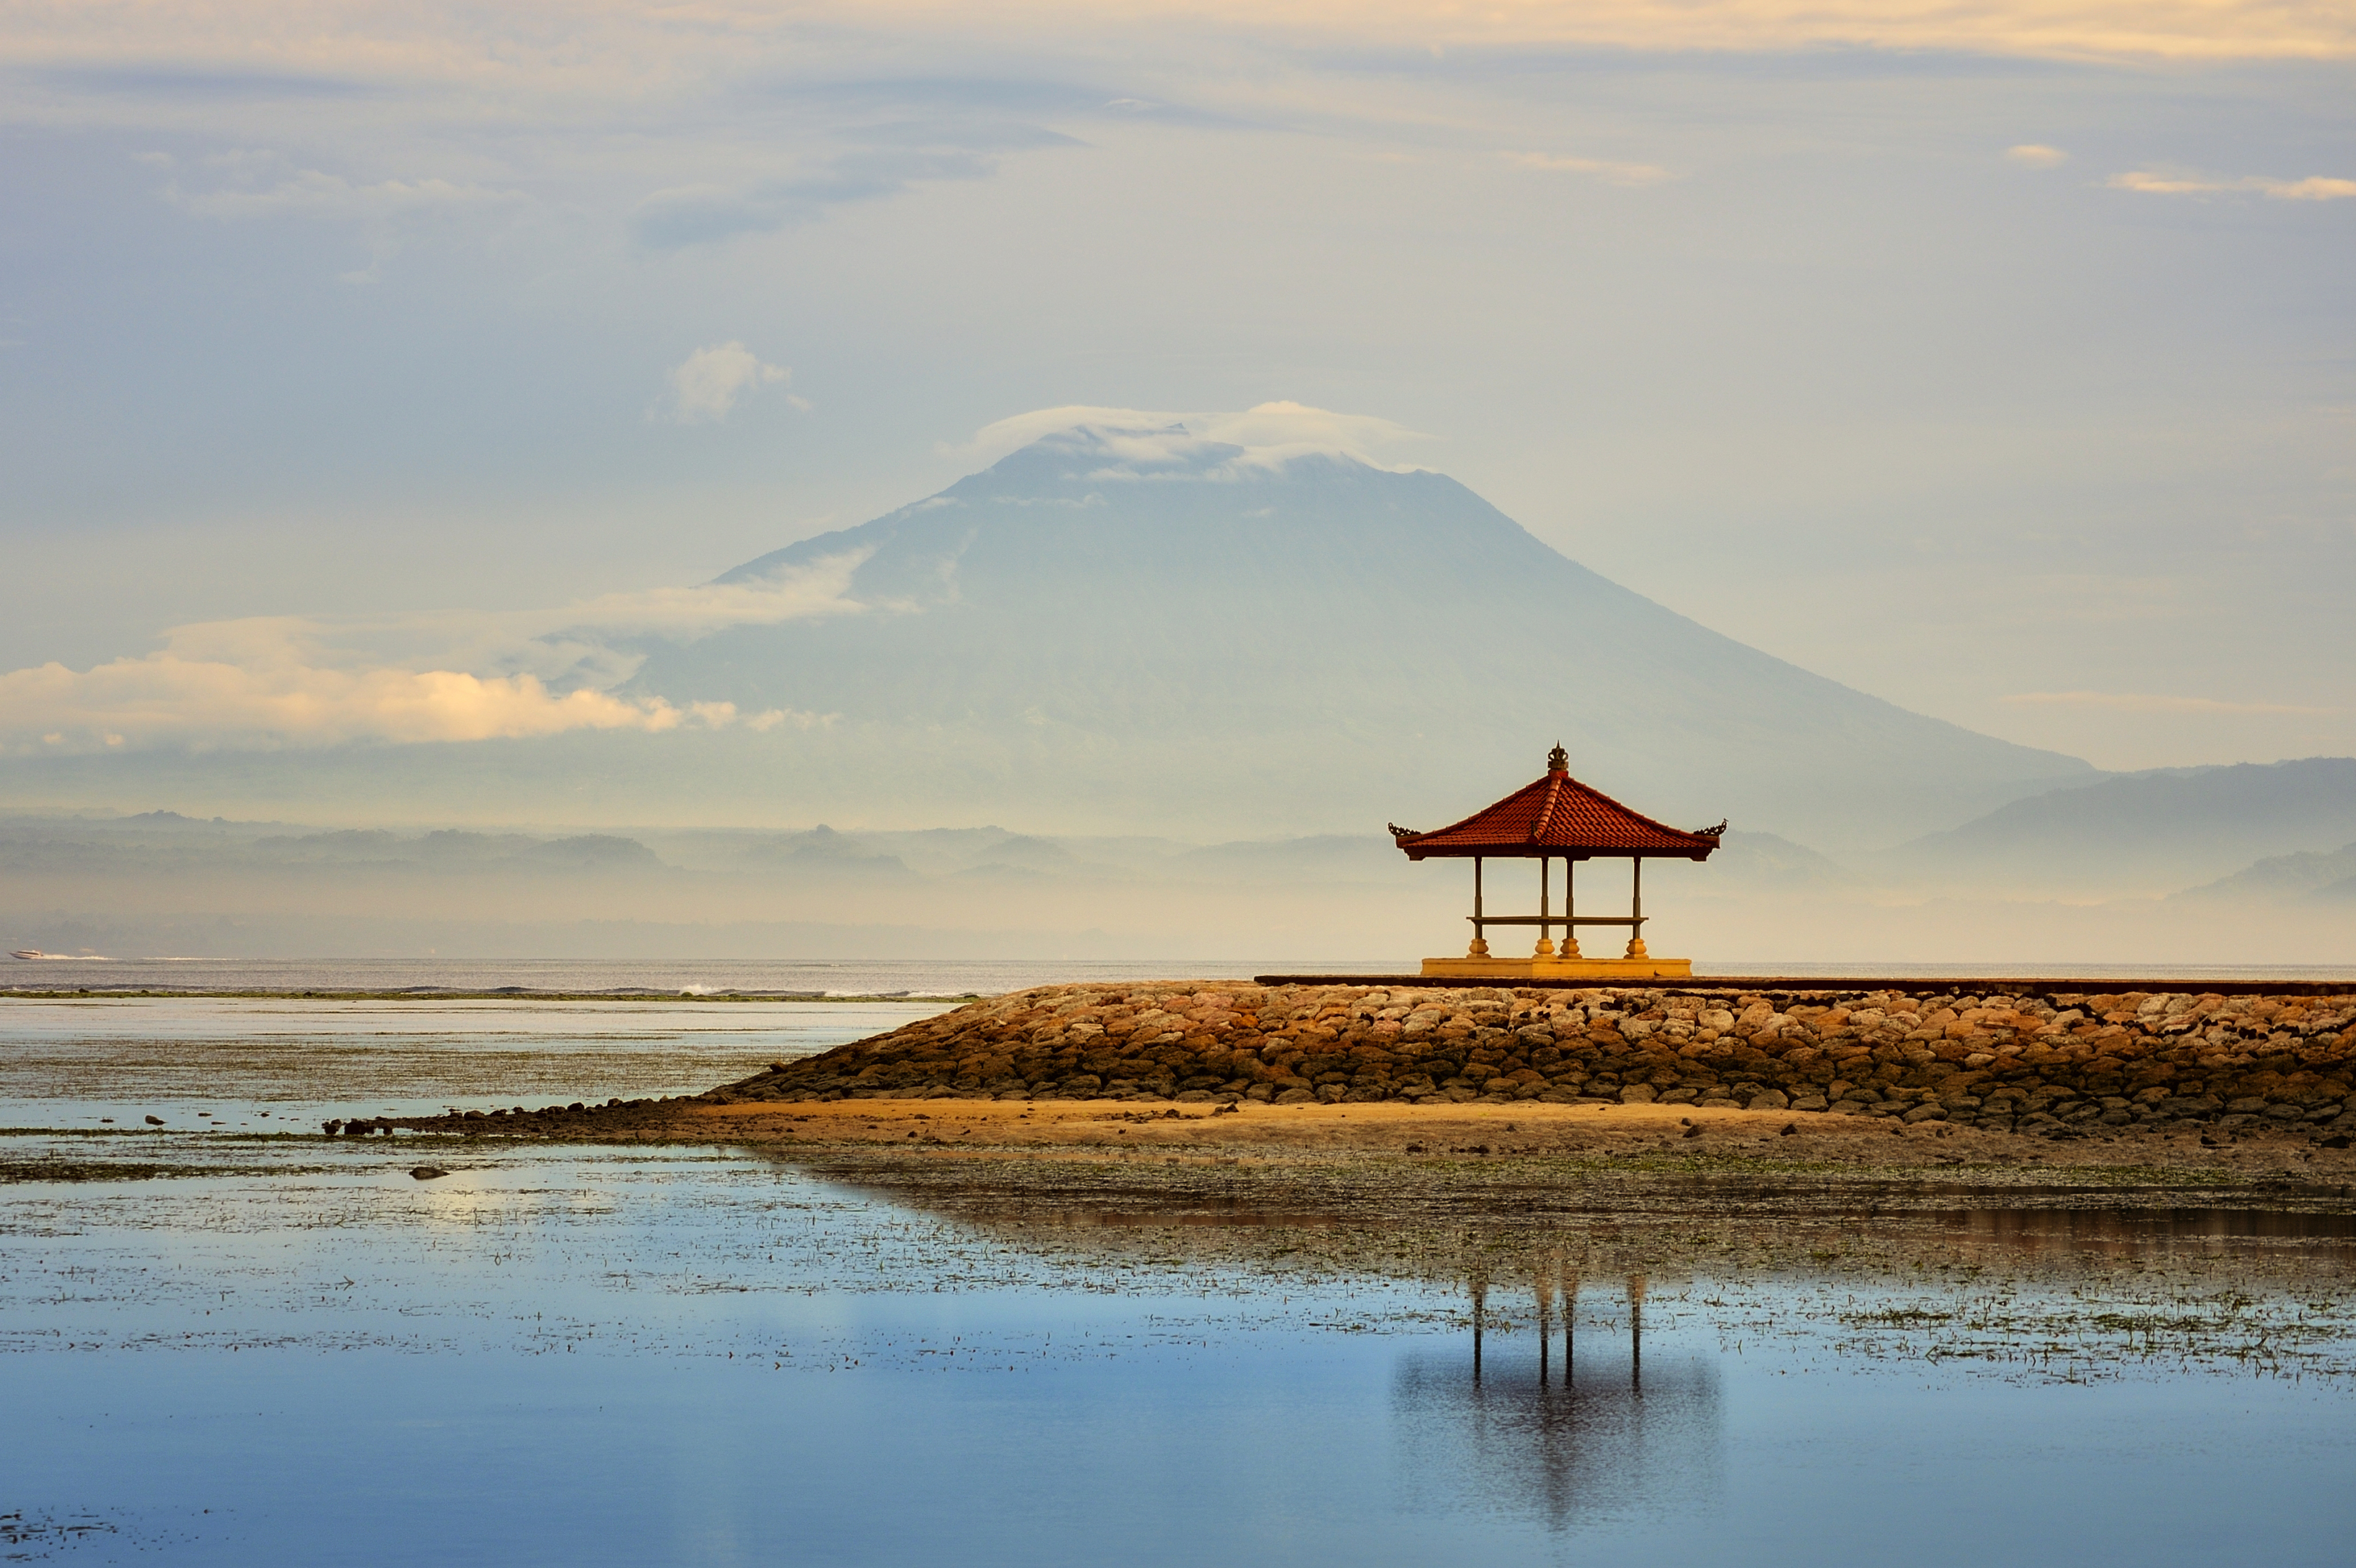  Sanur  Beach Sanur  Indonesia  Attractions Lonely Planet